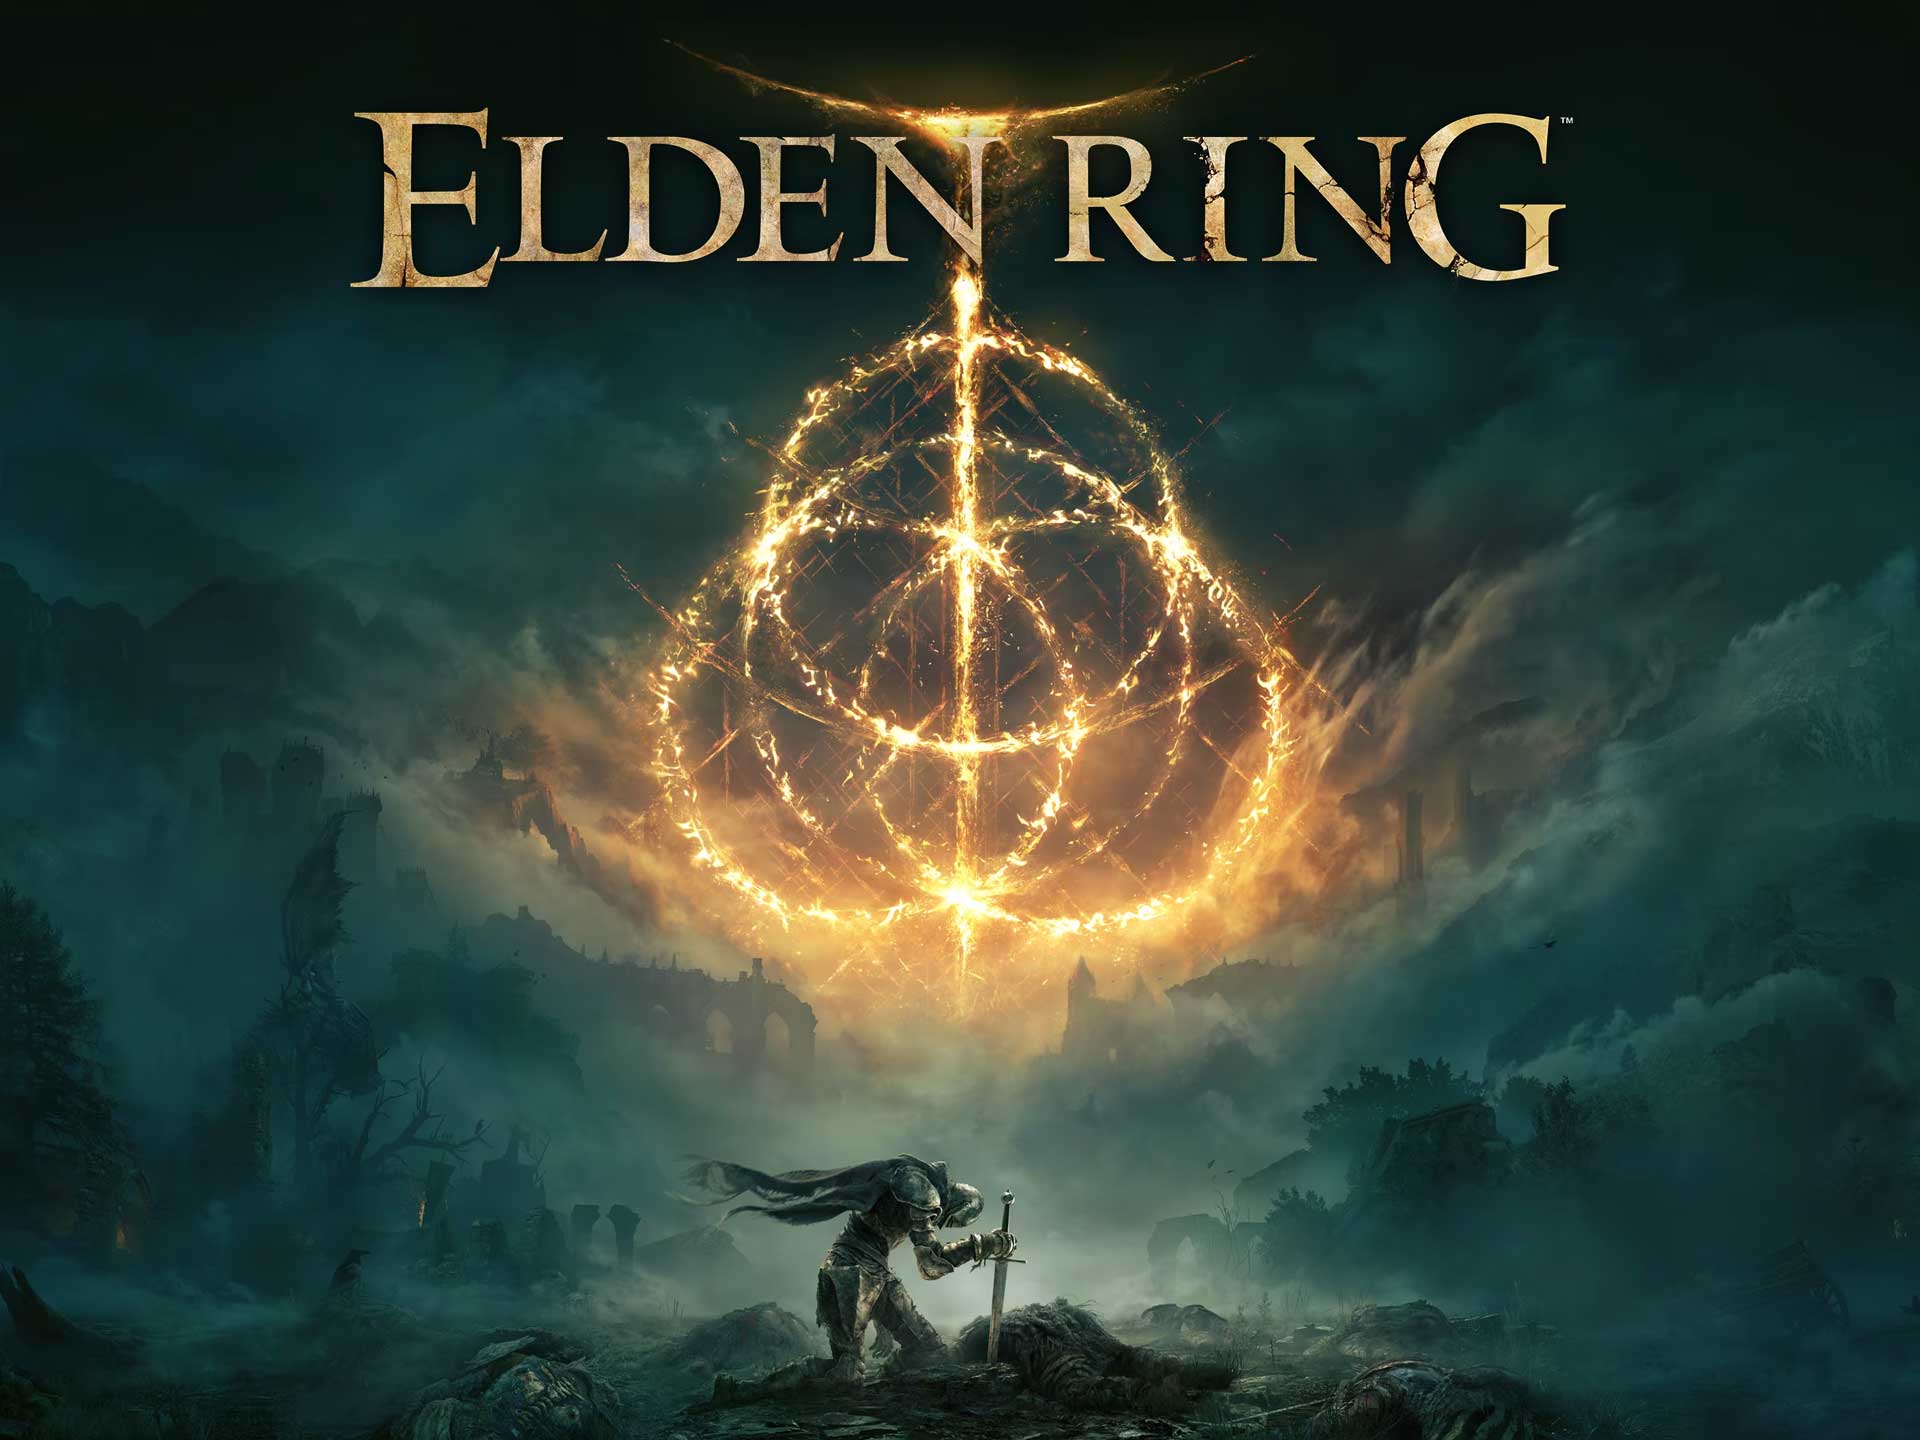 Elden Ring, The Old Couldron, theoldcouldron.com